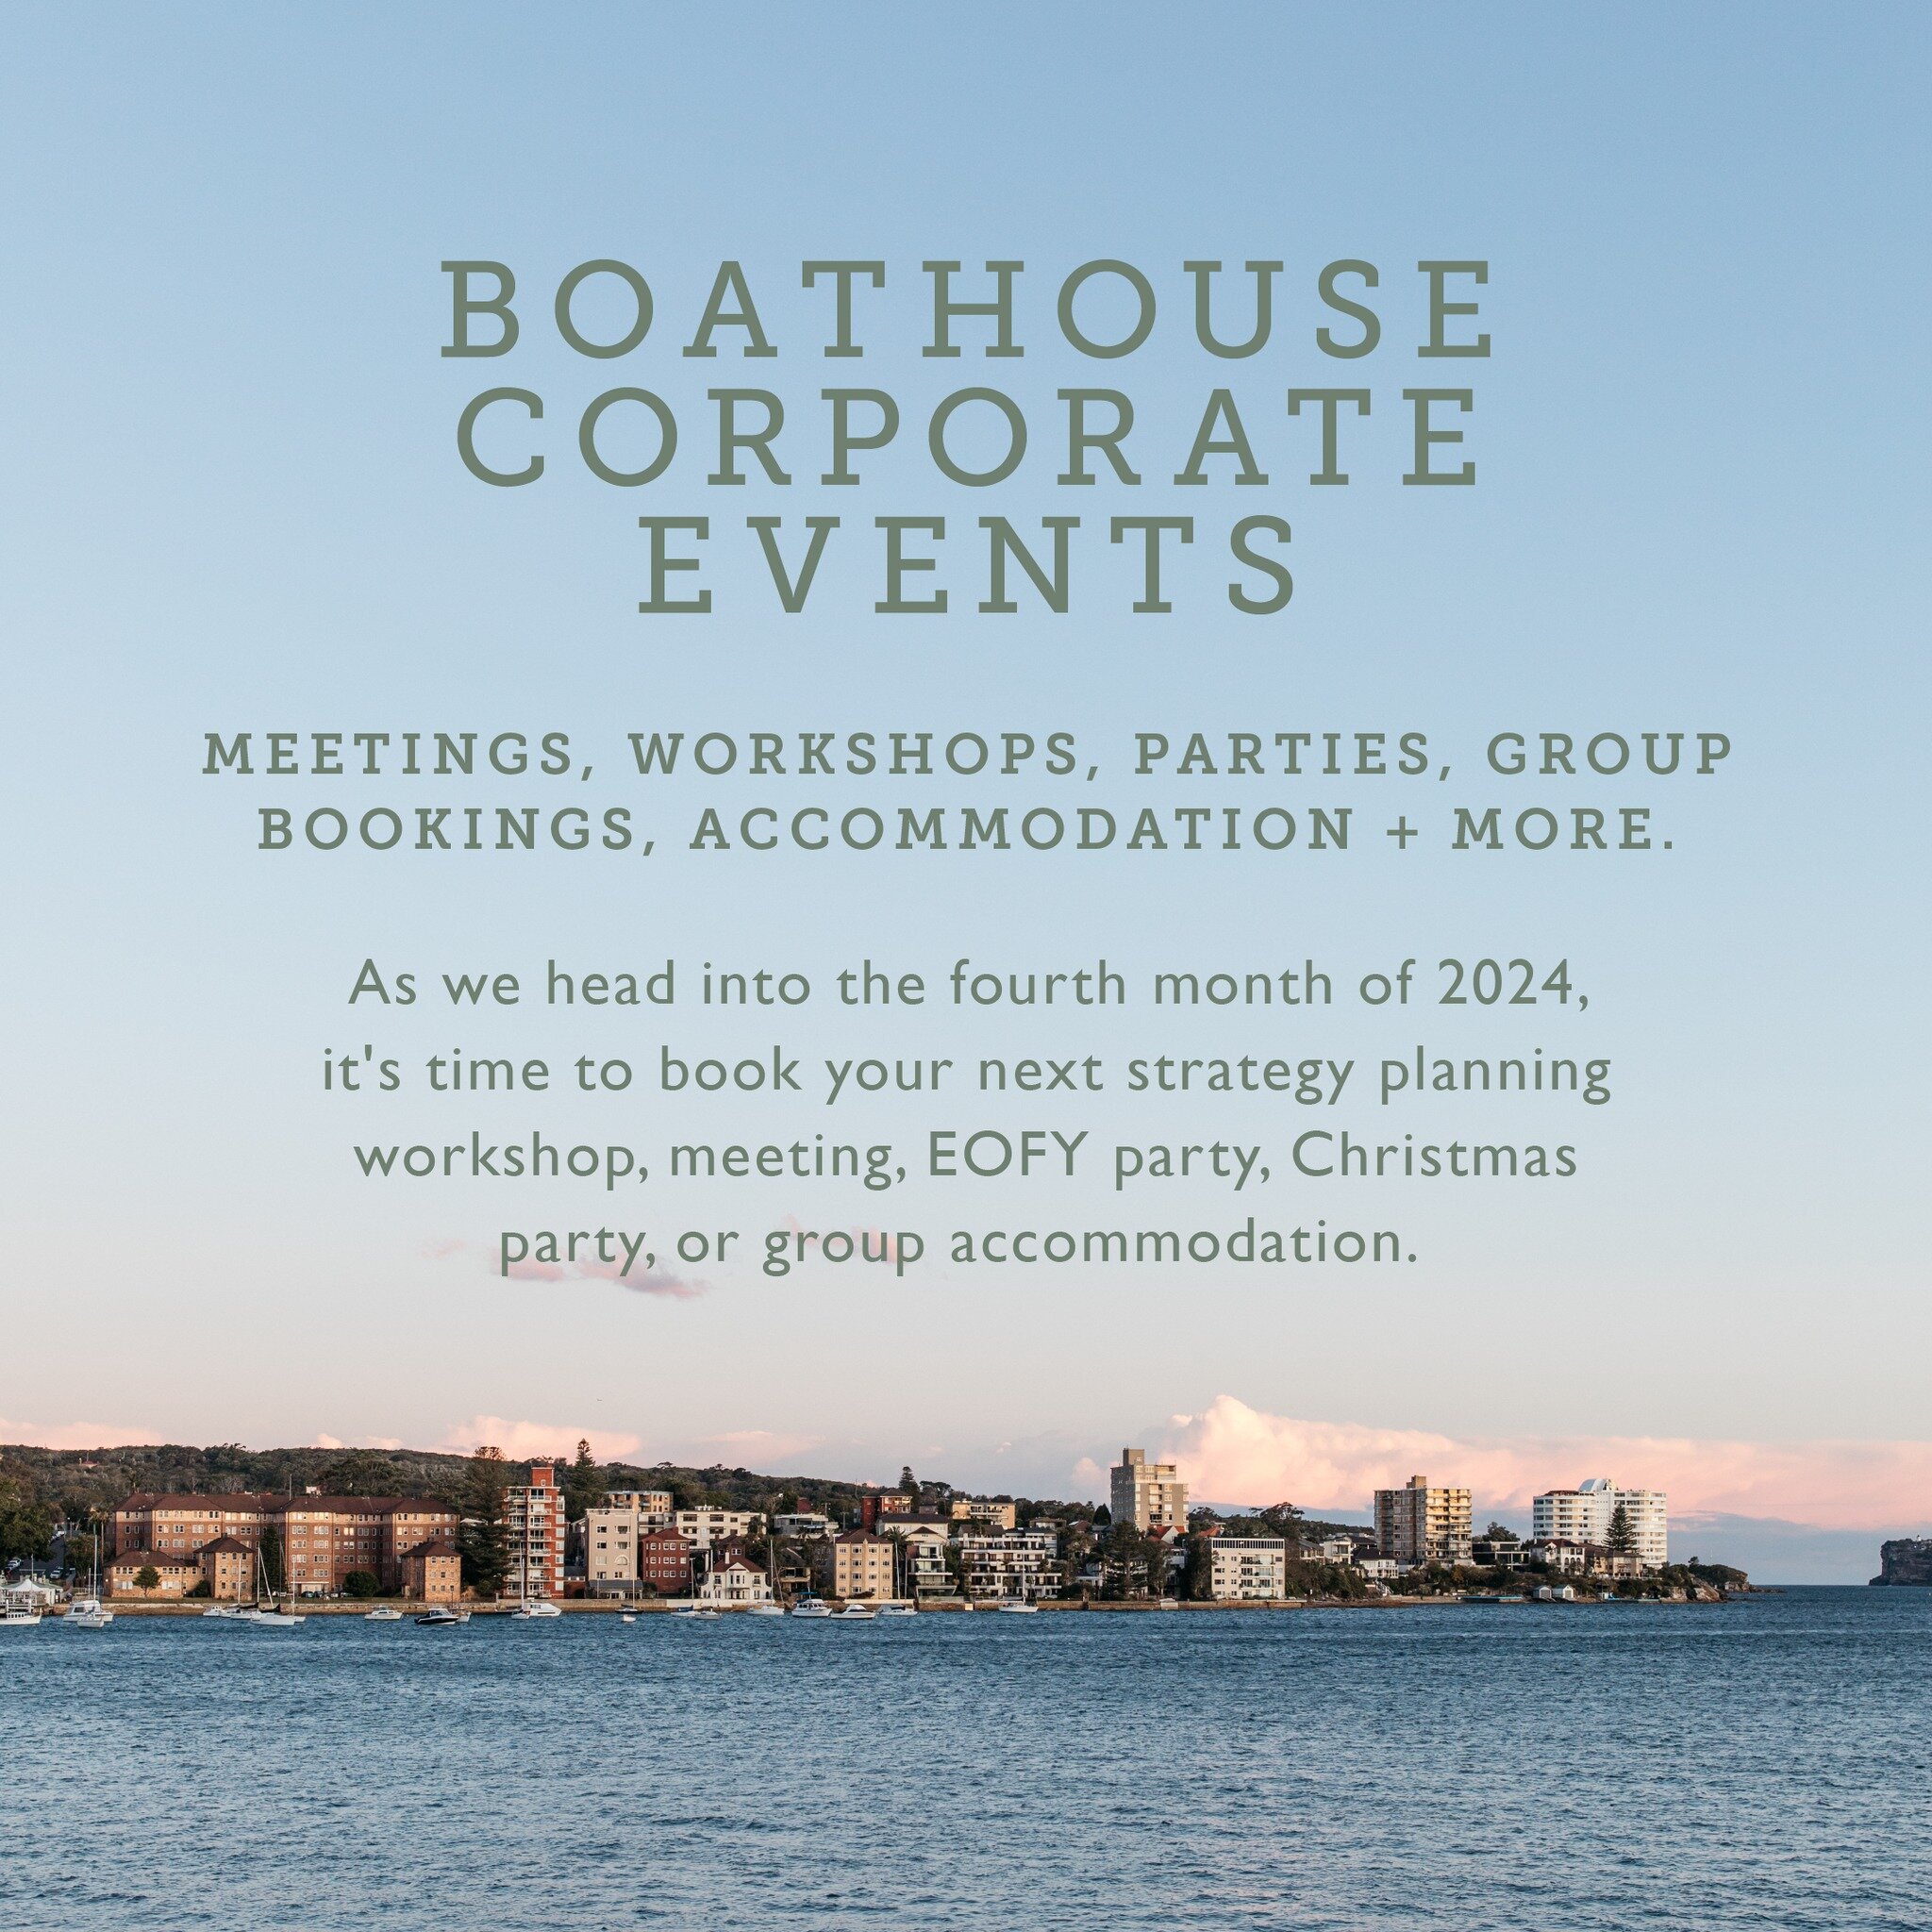 As we head into the fourth month of 2024, it's time to book your next strategy planning workshop, meeting, EOFY party, Christmas party, or group accommodation. 

We offer corporate events at the following venues: Manly Pavilion, The Boathouse Shelly 